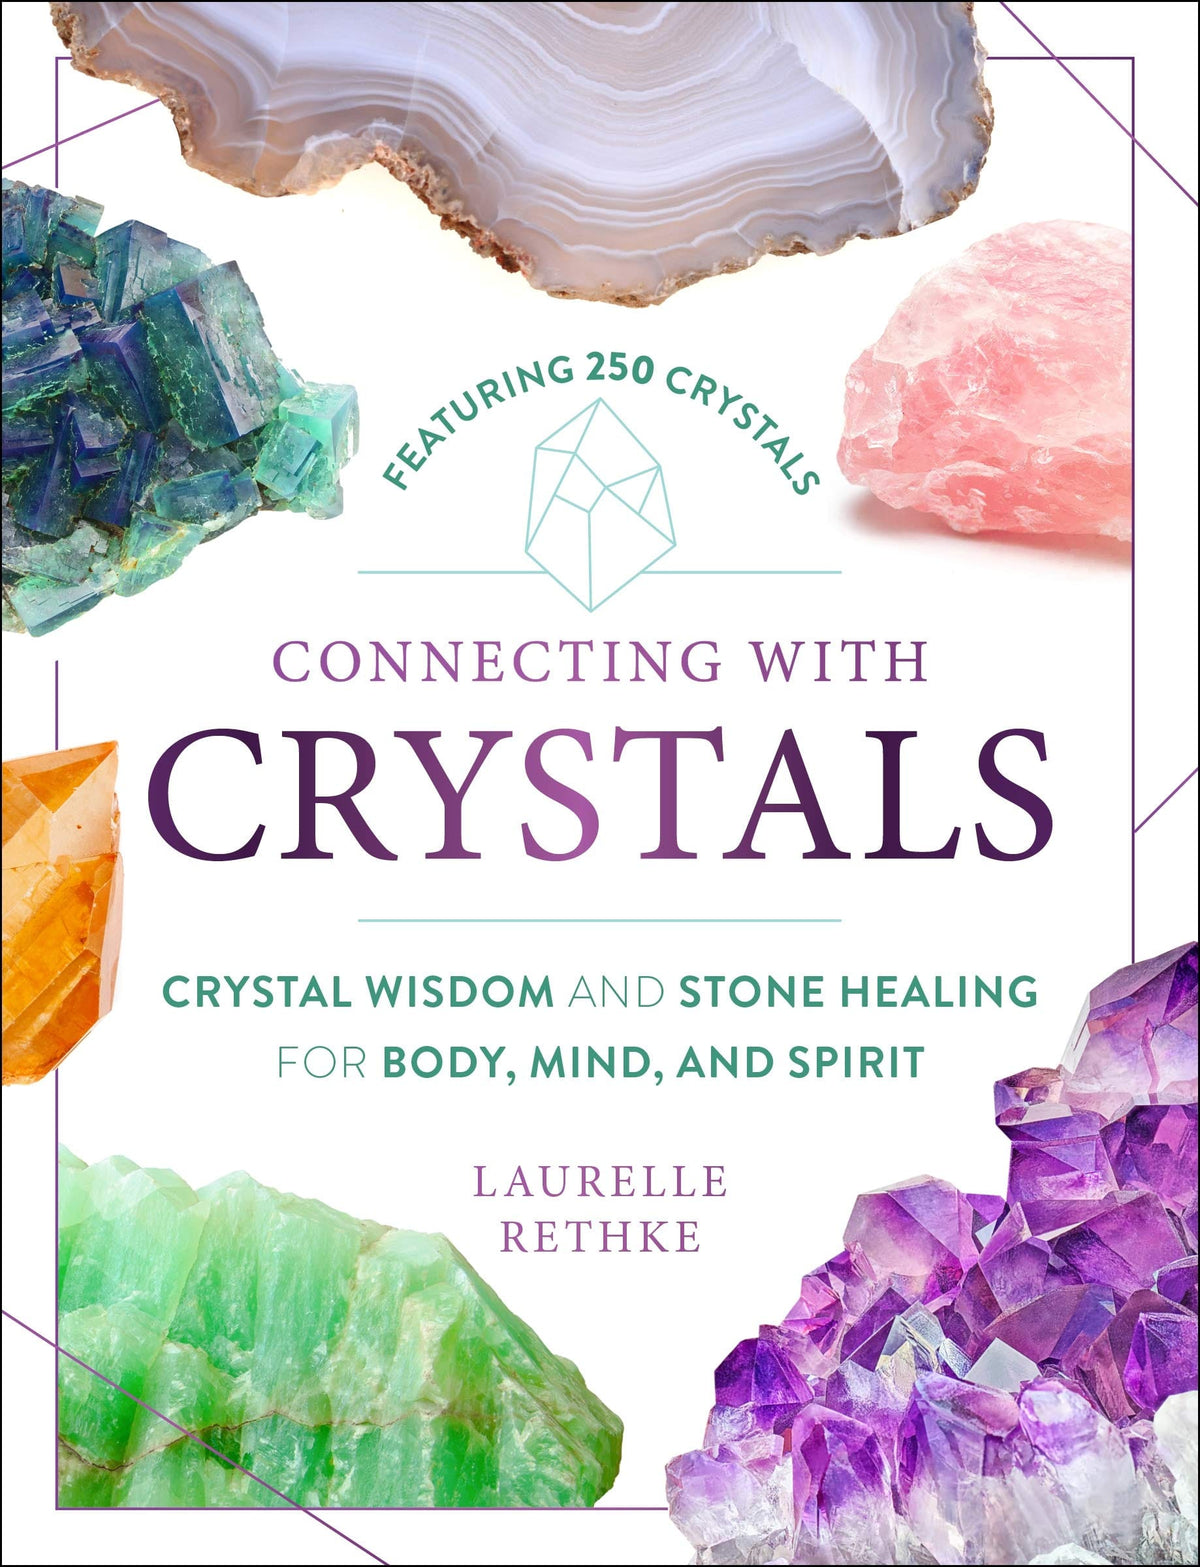 Connecting with Crystals: Crystal Wisdom and Stone Healing for Body Mind and Spirit - Third Eye